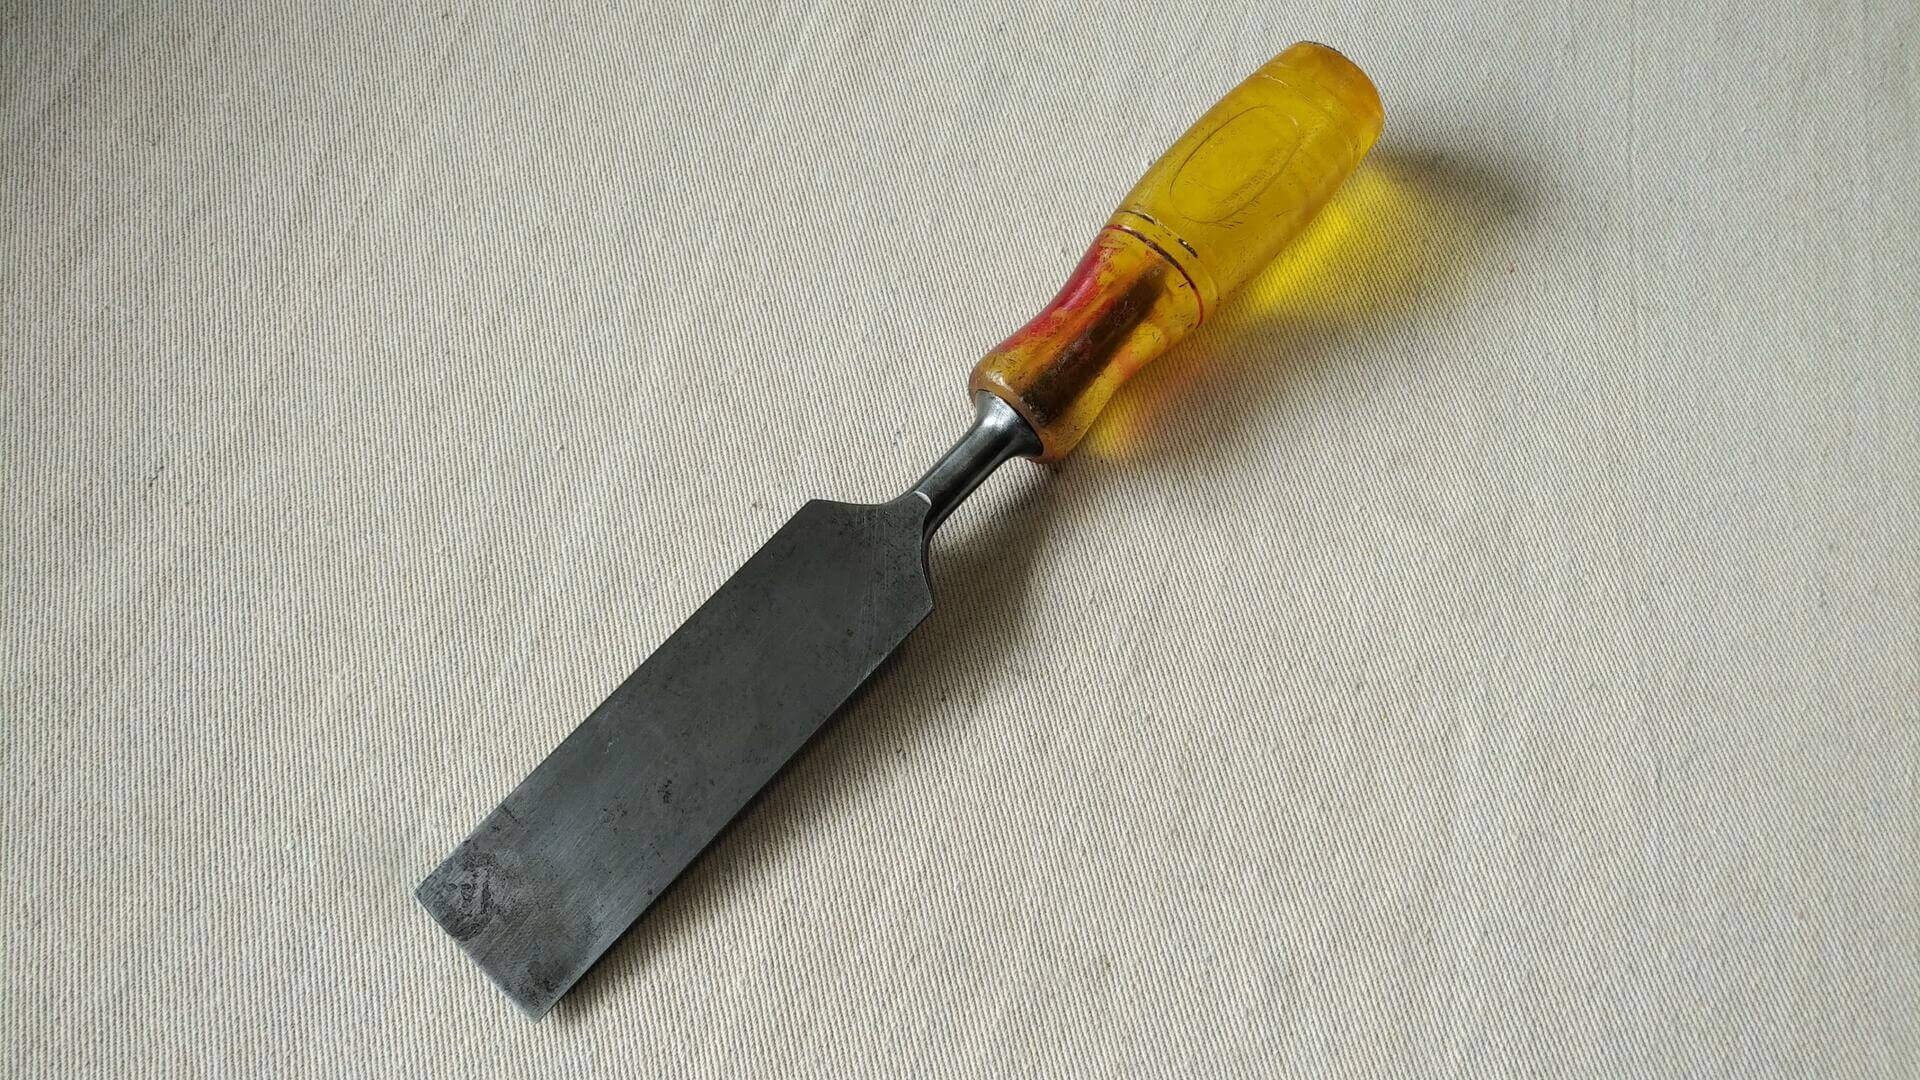 Vintage WM Marples and Sons 1 1/4″ tang chisel with the Shamrock trade mark. Antique made in Sheffield England collectible carpentry and woodworking tools